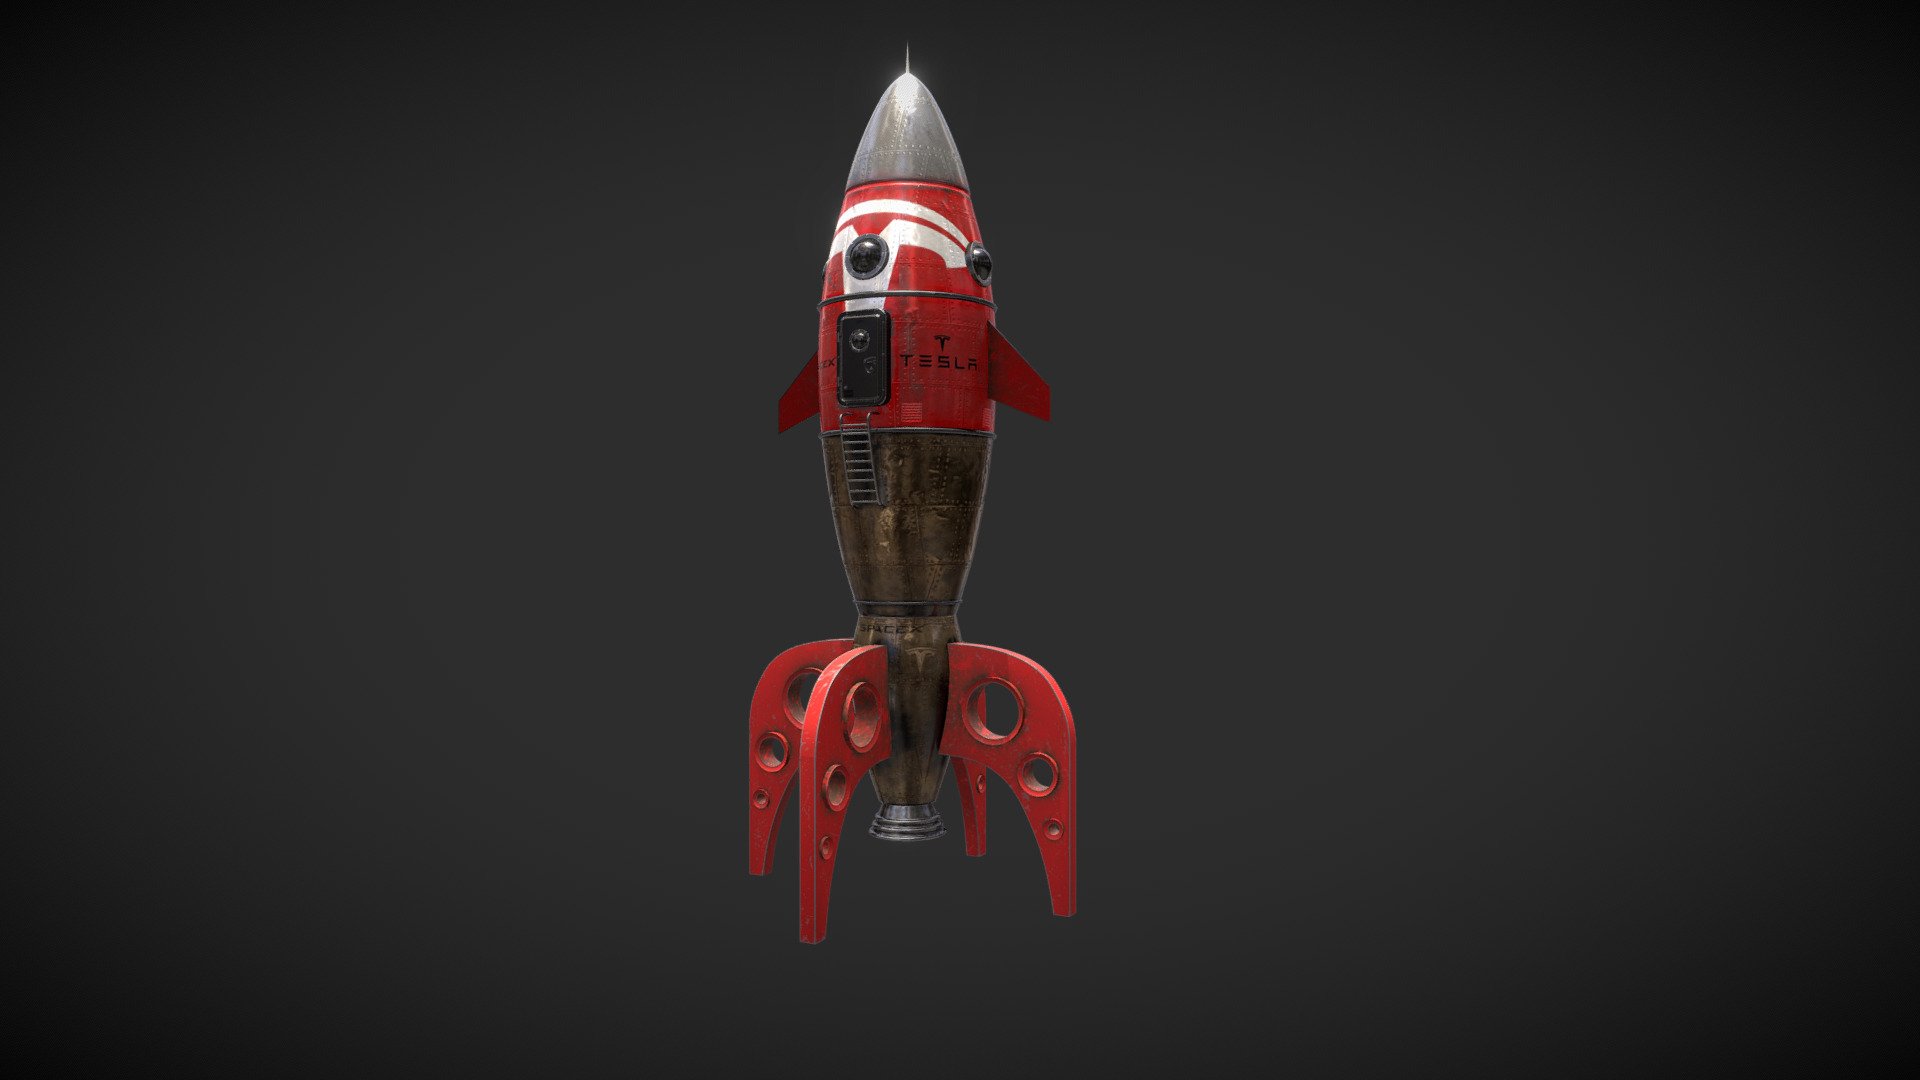 Tesla Space X Toy Rocket - Tesla Space X Toy Rocket - 3D model by nomercy.rms 3d model